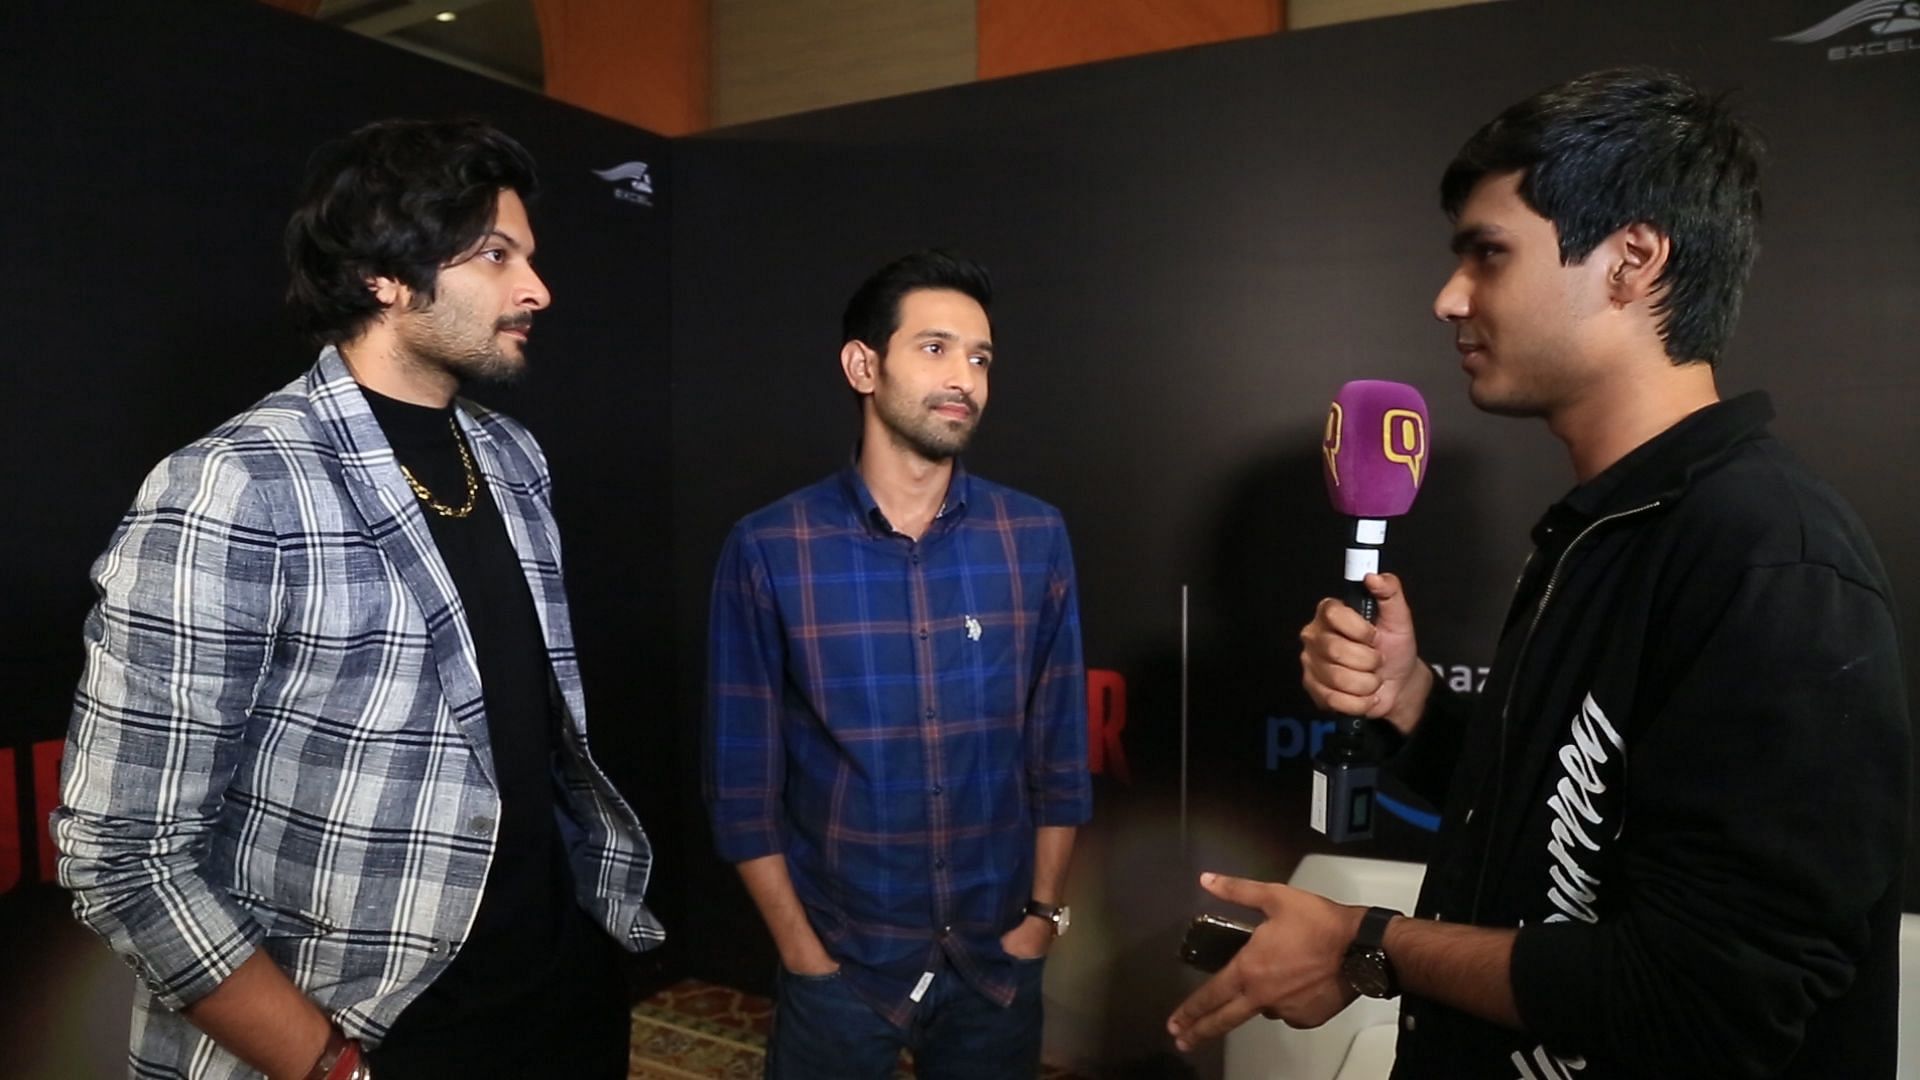 Ali Fazal and Vikrant Massey talk to us about their new show <i>Mirzapur</i>.